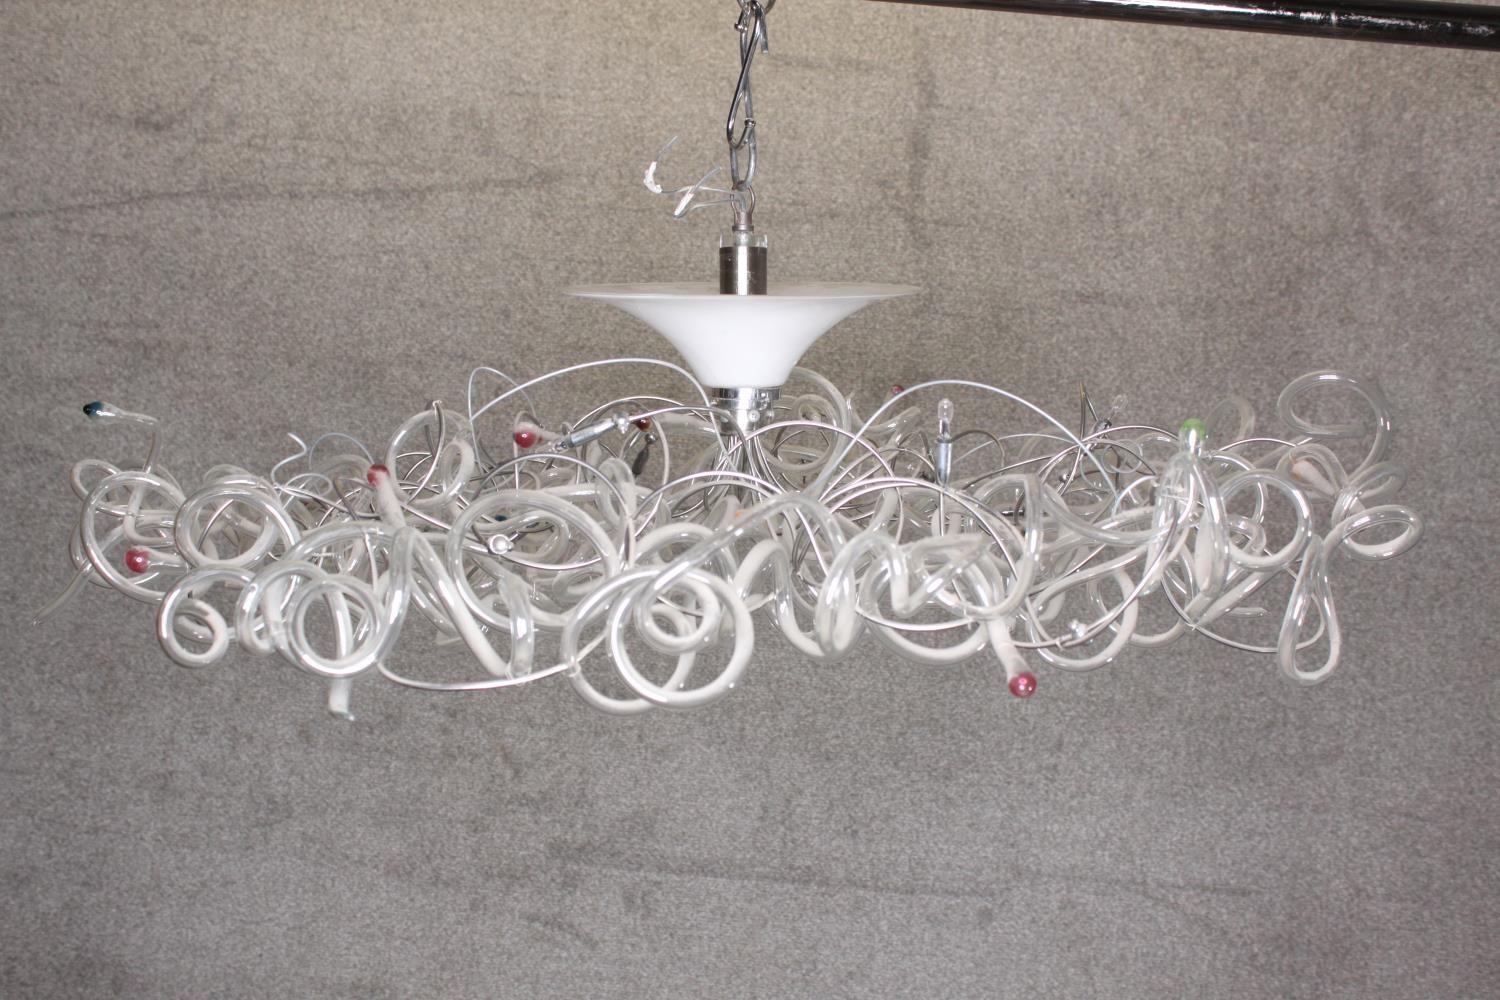 Rocco Borghese. From the artist's Chandelier range. H.25 x Dia. 85 cm.